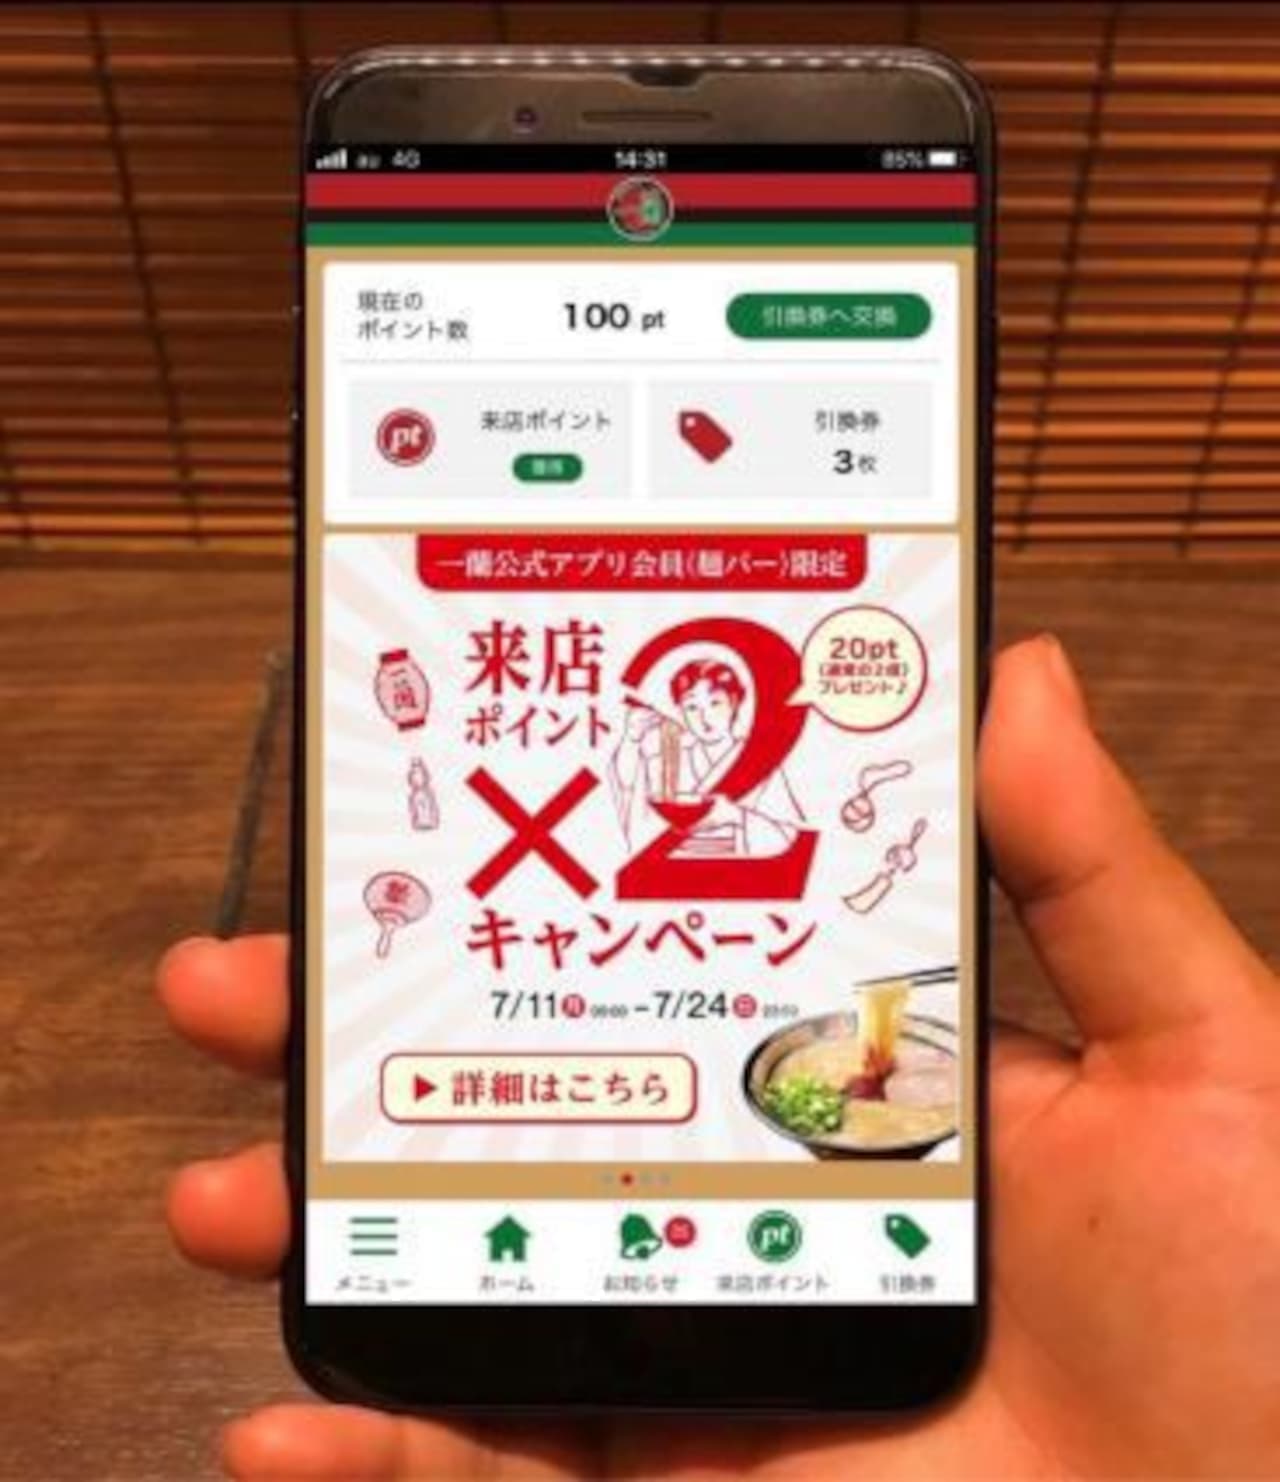 Ichiran "Ichiran Official App Double Points for Visiting Store" Campaign